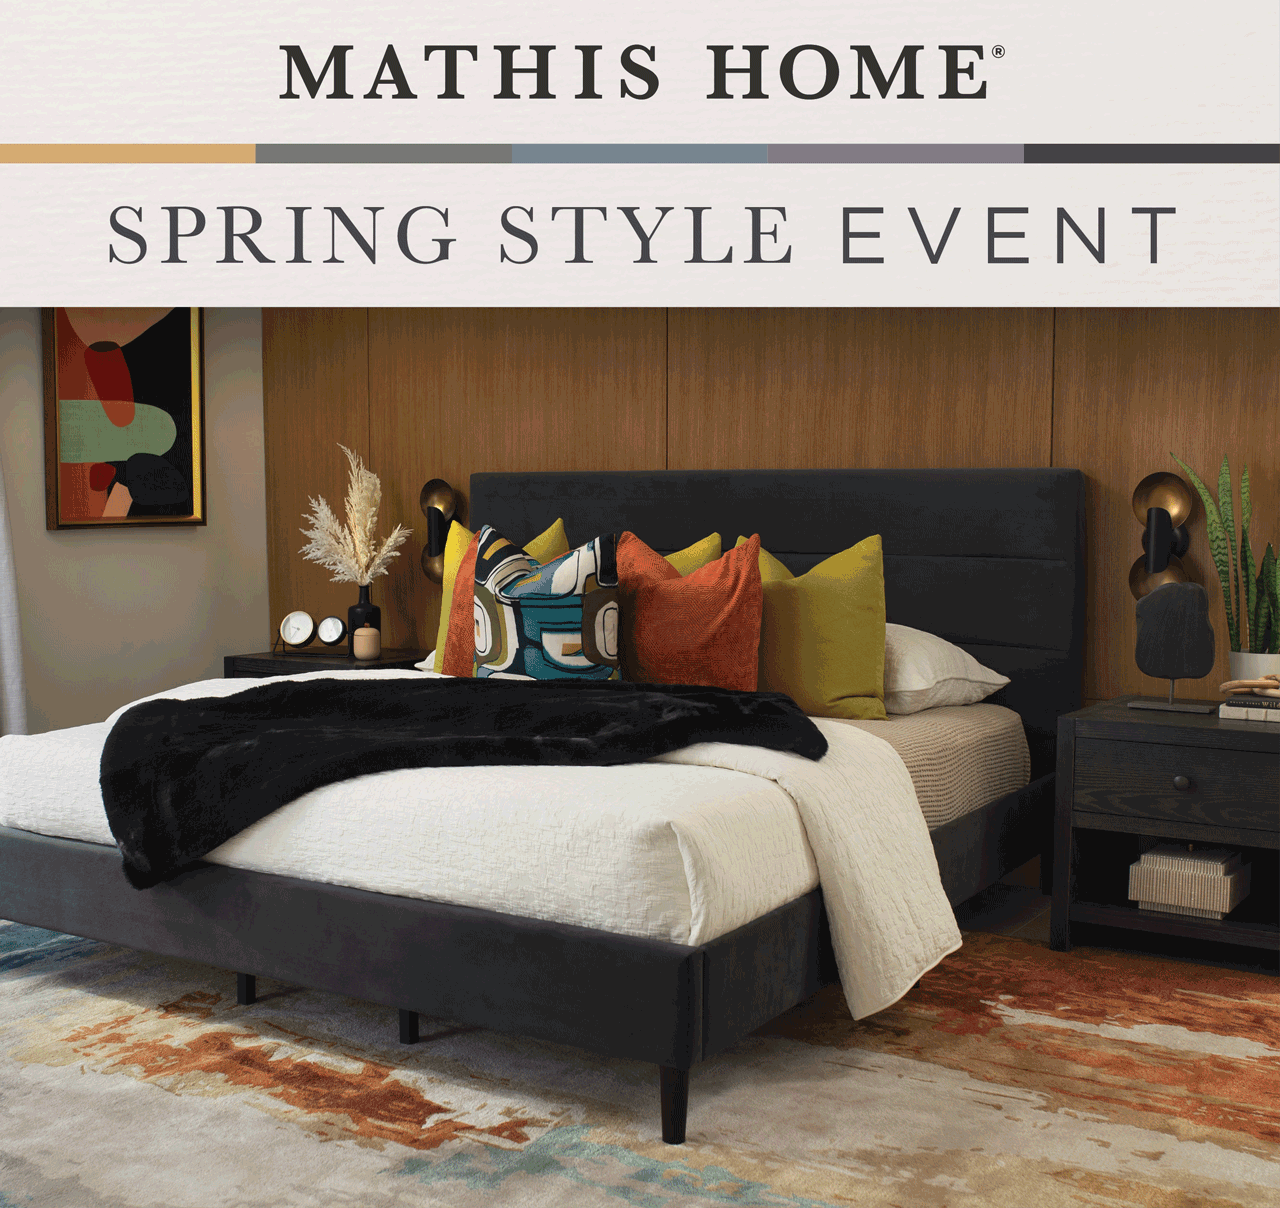 Mathis Home Spring Style Event